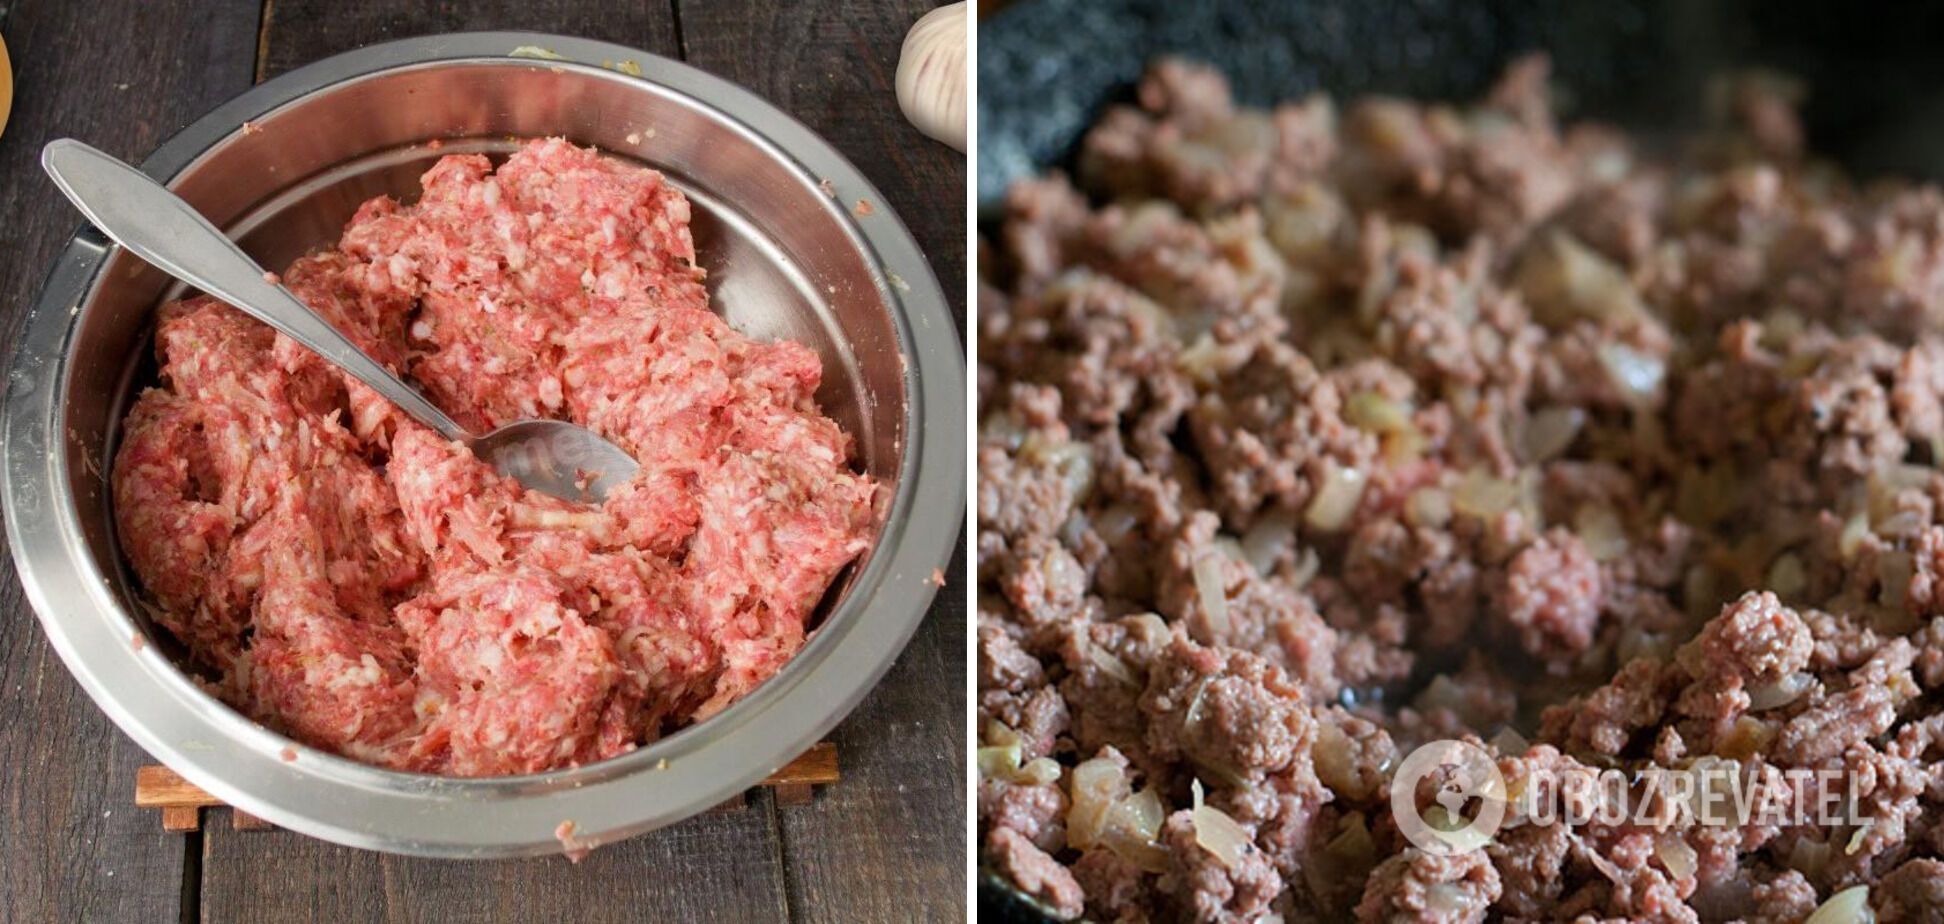 Minced meat for a dish